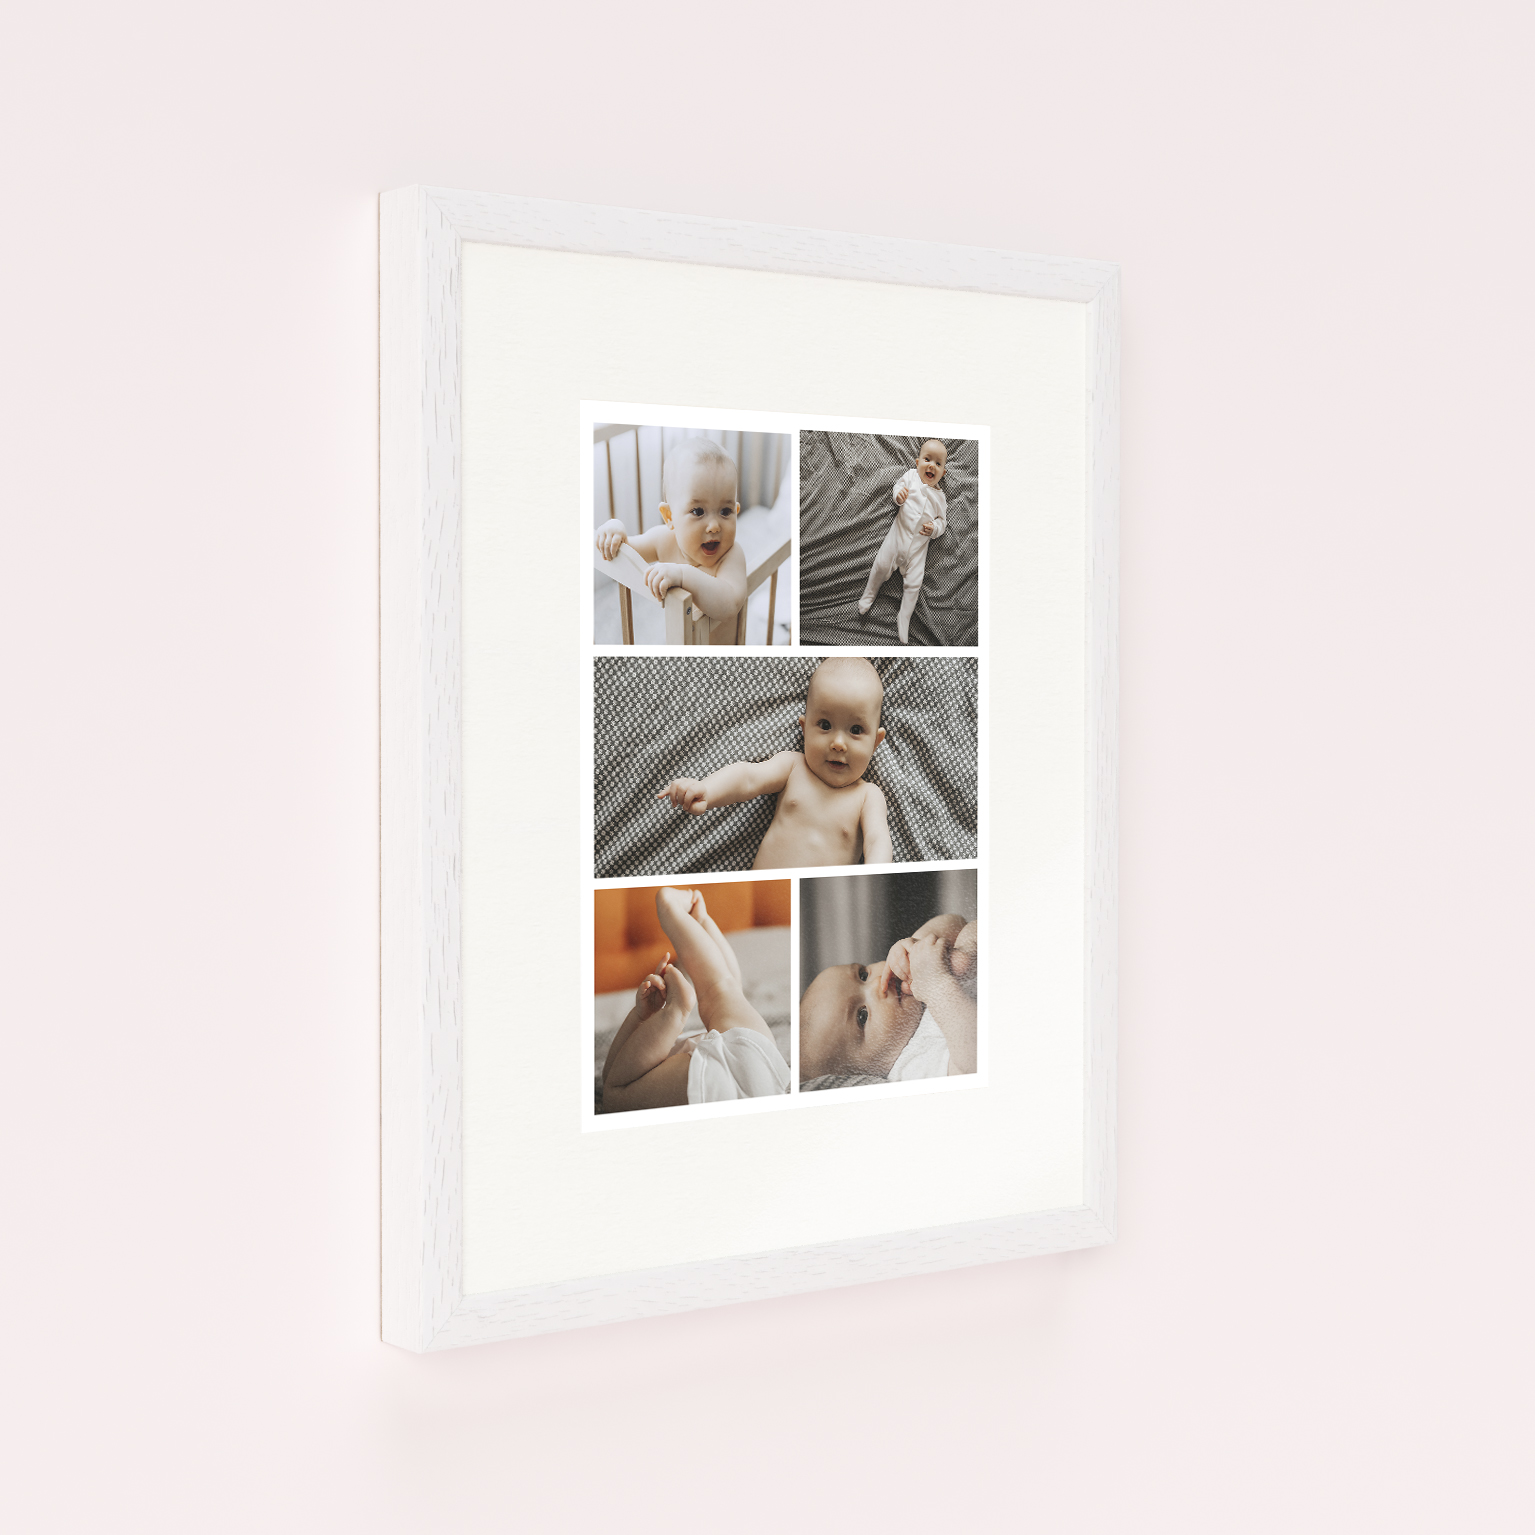 Photo of a framed photo print called 'Childhood Kaleidoscope'. It is 40cm x 30cm in size, in a Portrait orientation. It has space for 5 photos.